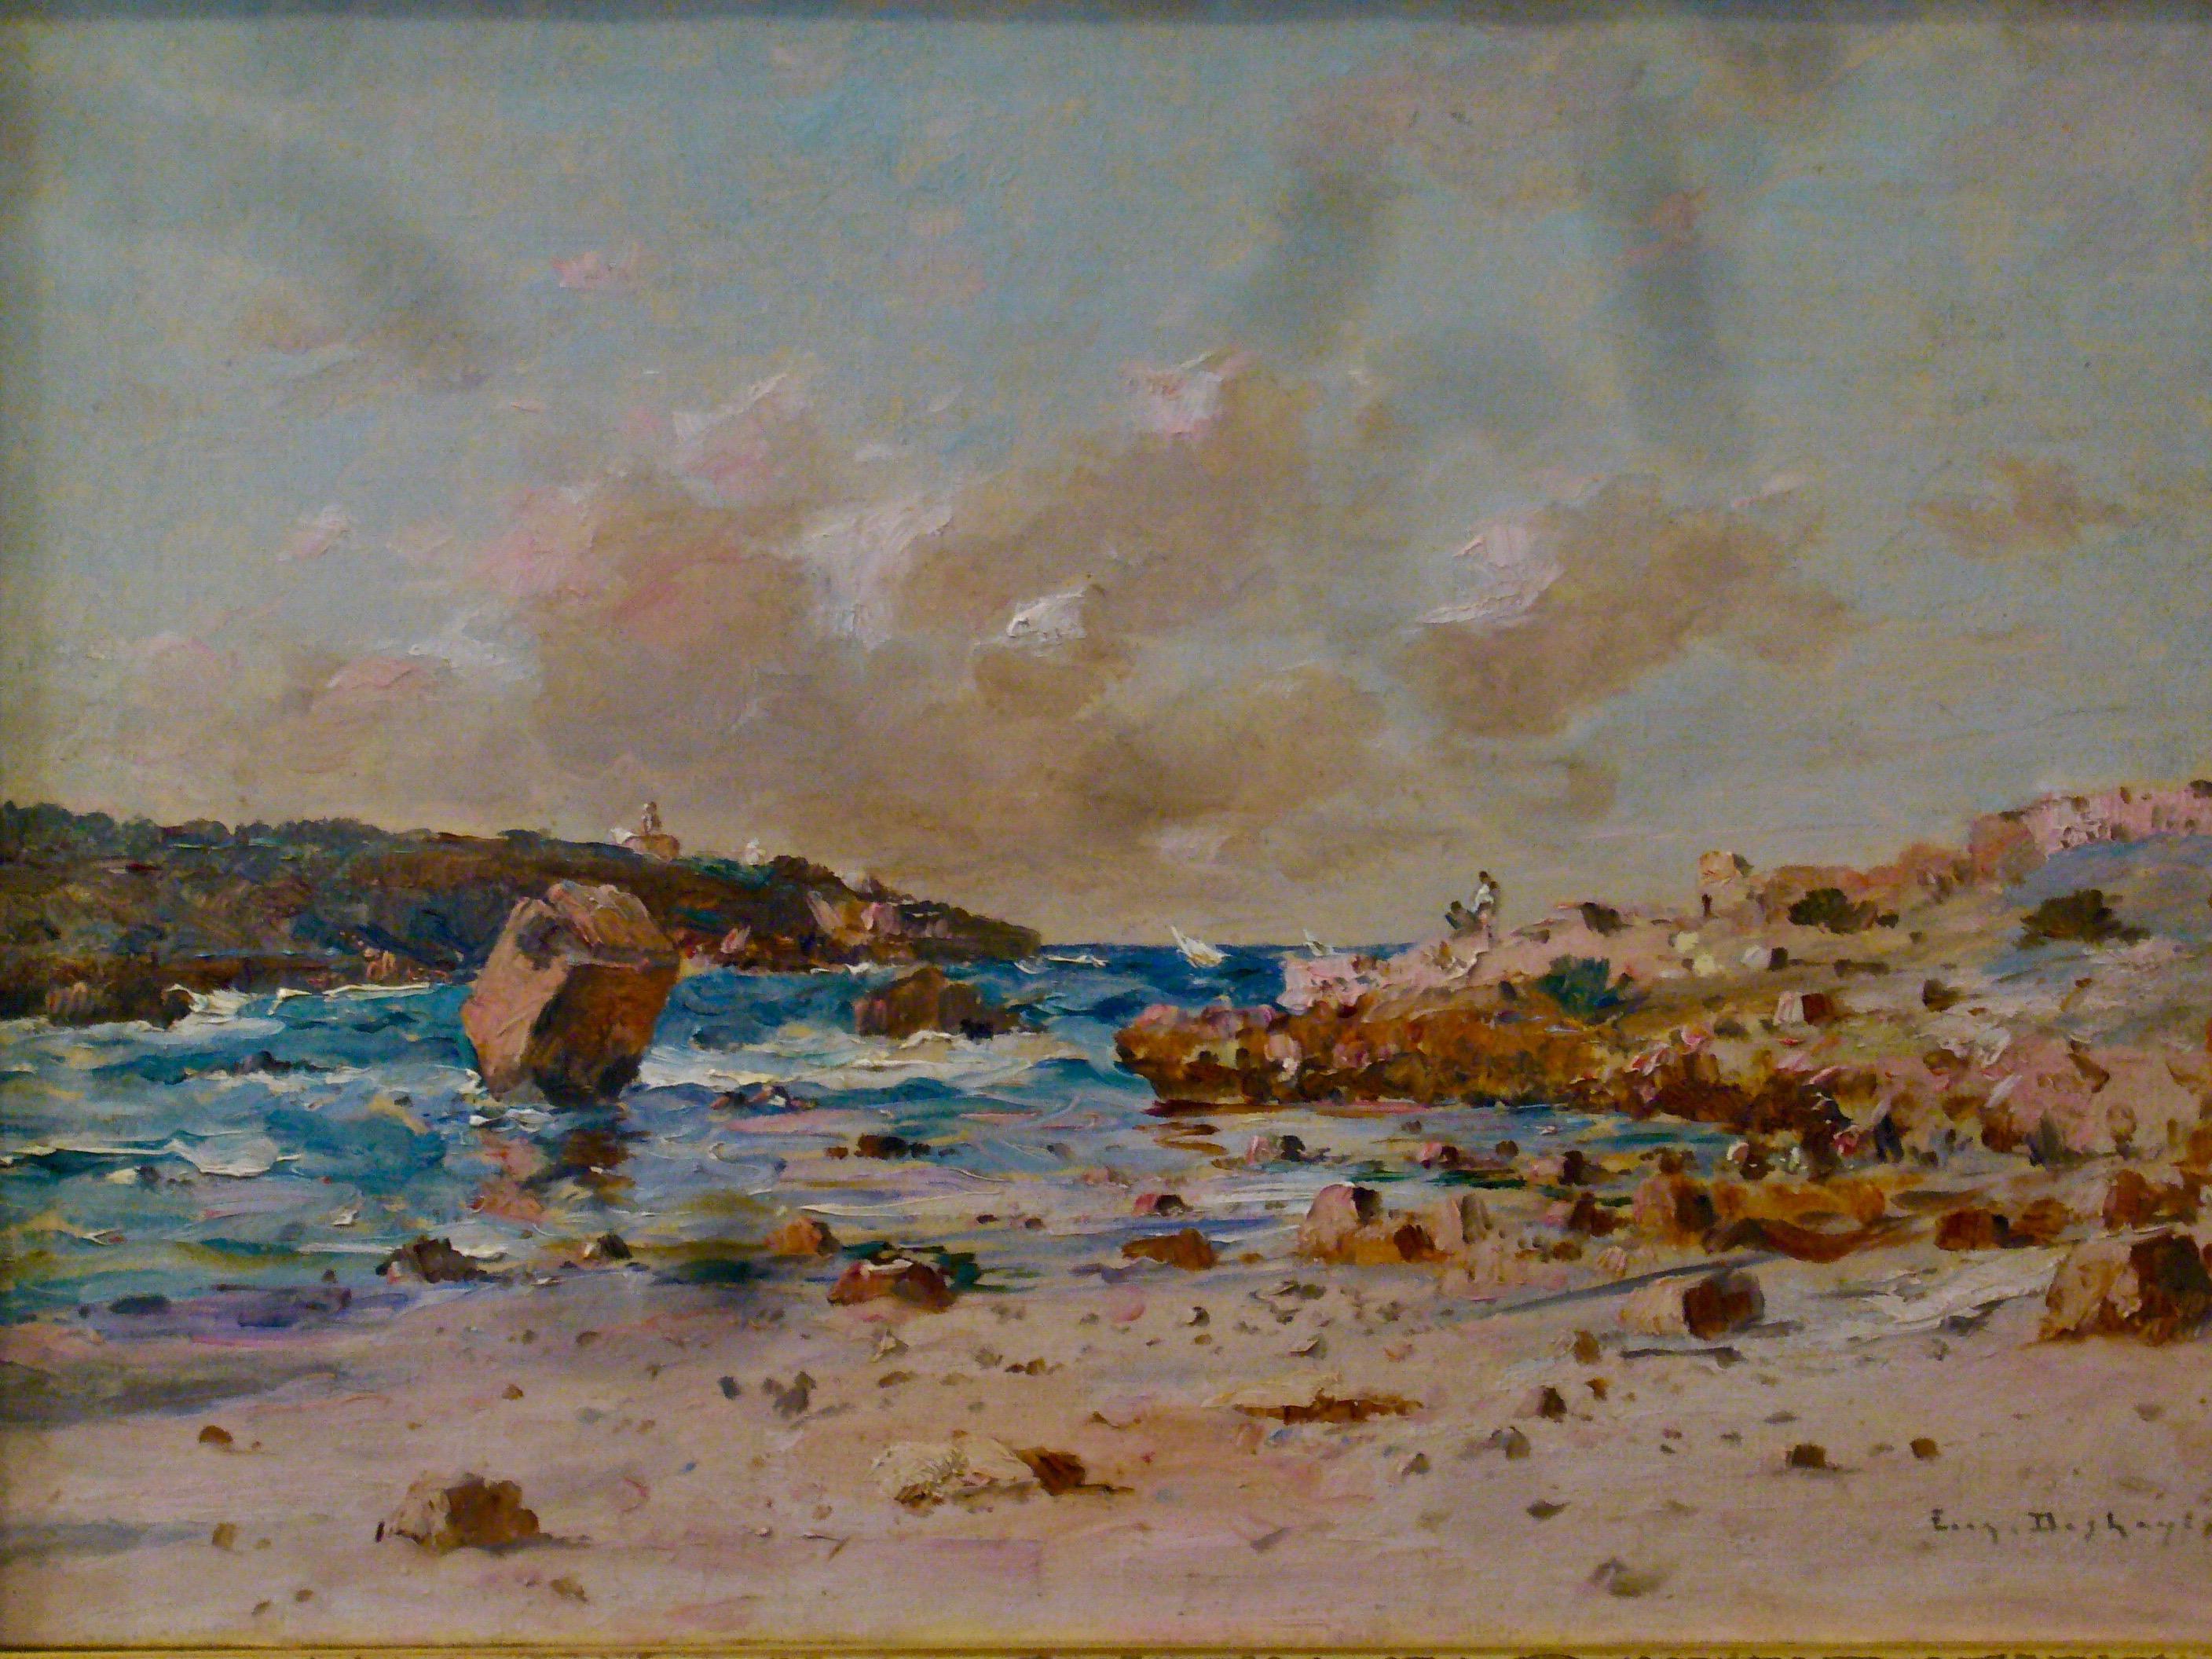 Eugène Deshayes  (1828-1890) 

Une côte rocheuse en Normandie
Signed French Impressionist Oil on Original Canvas, c. 1880

Eugène Deshayes was a French painter who was born in 1828.  He began his painterly studies under the guidance of his father,